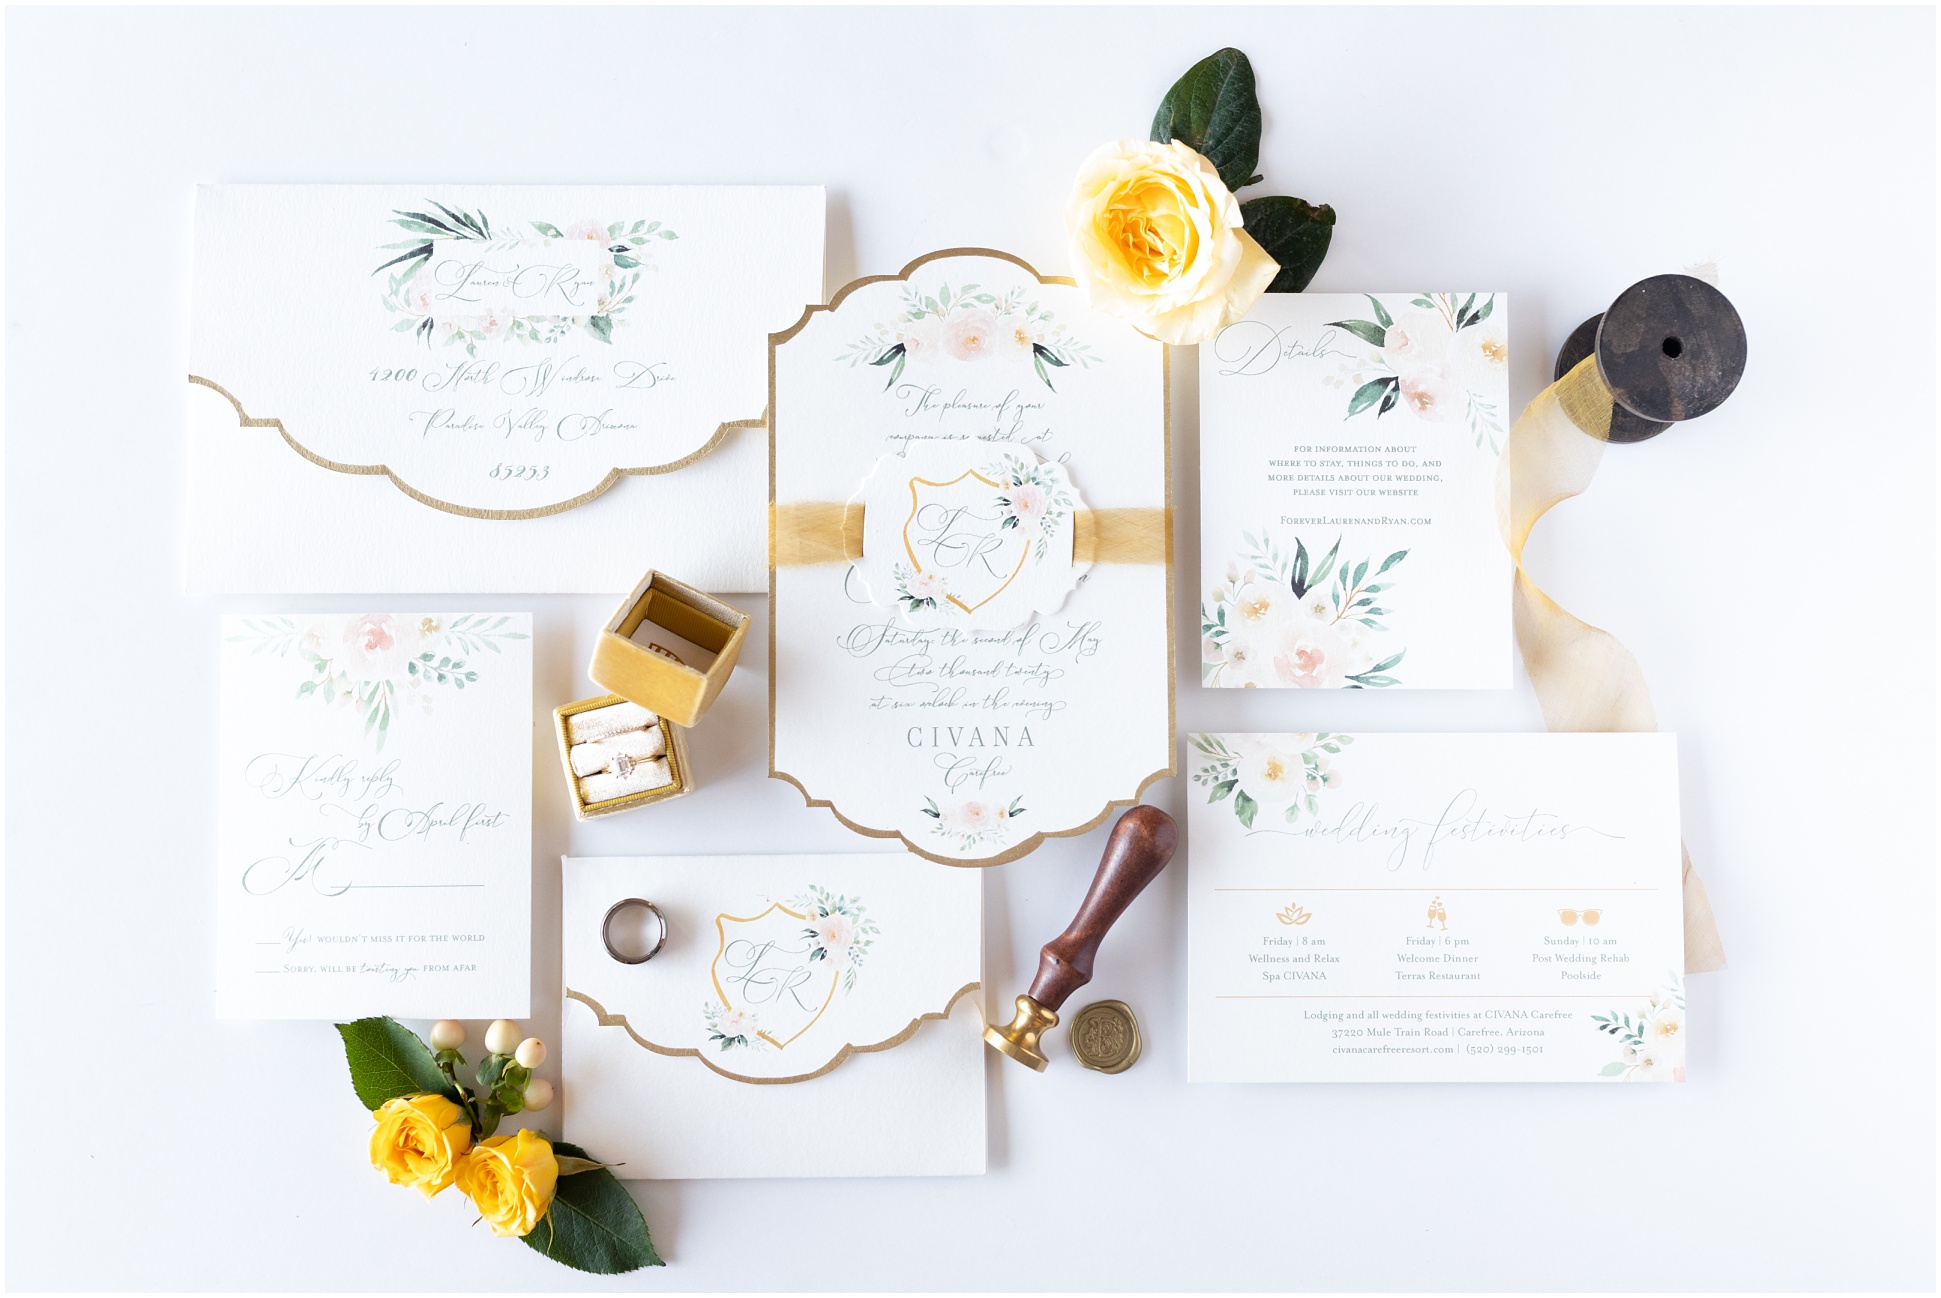 A Full Flat Lay of an Invitation Suite by Victoria York Design and floral pieces by Honey and Shaw